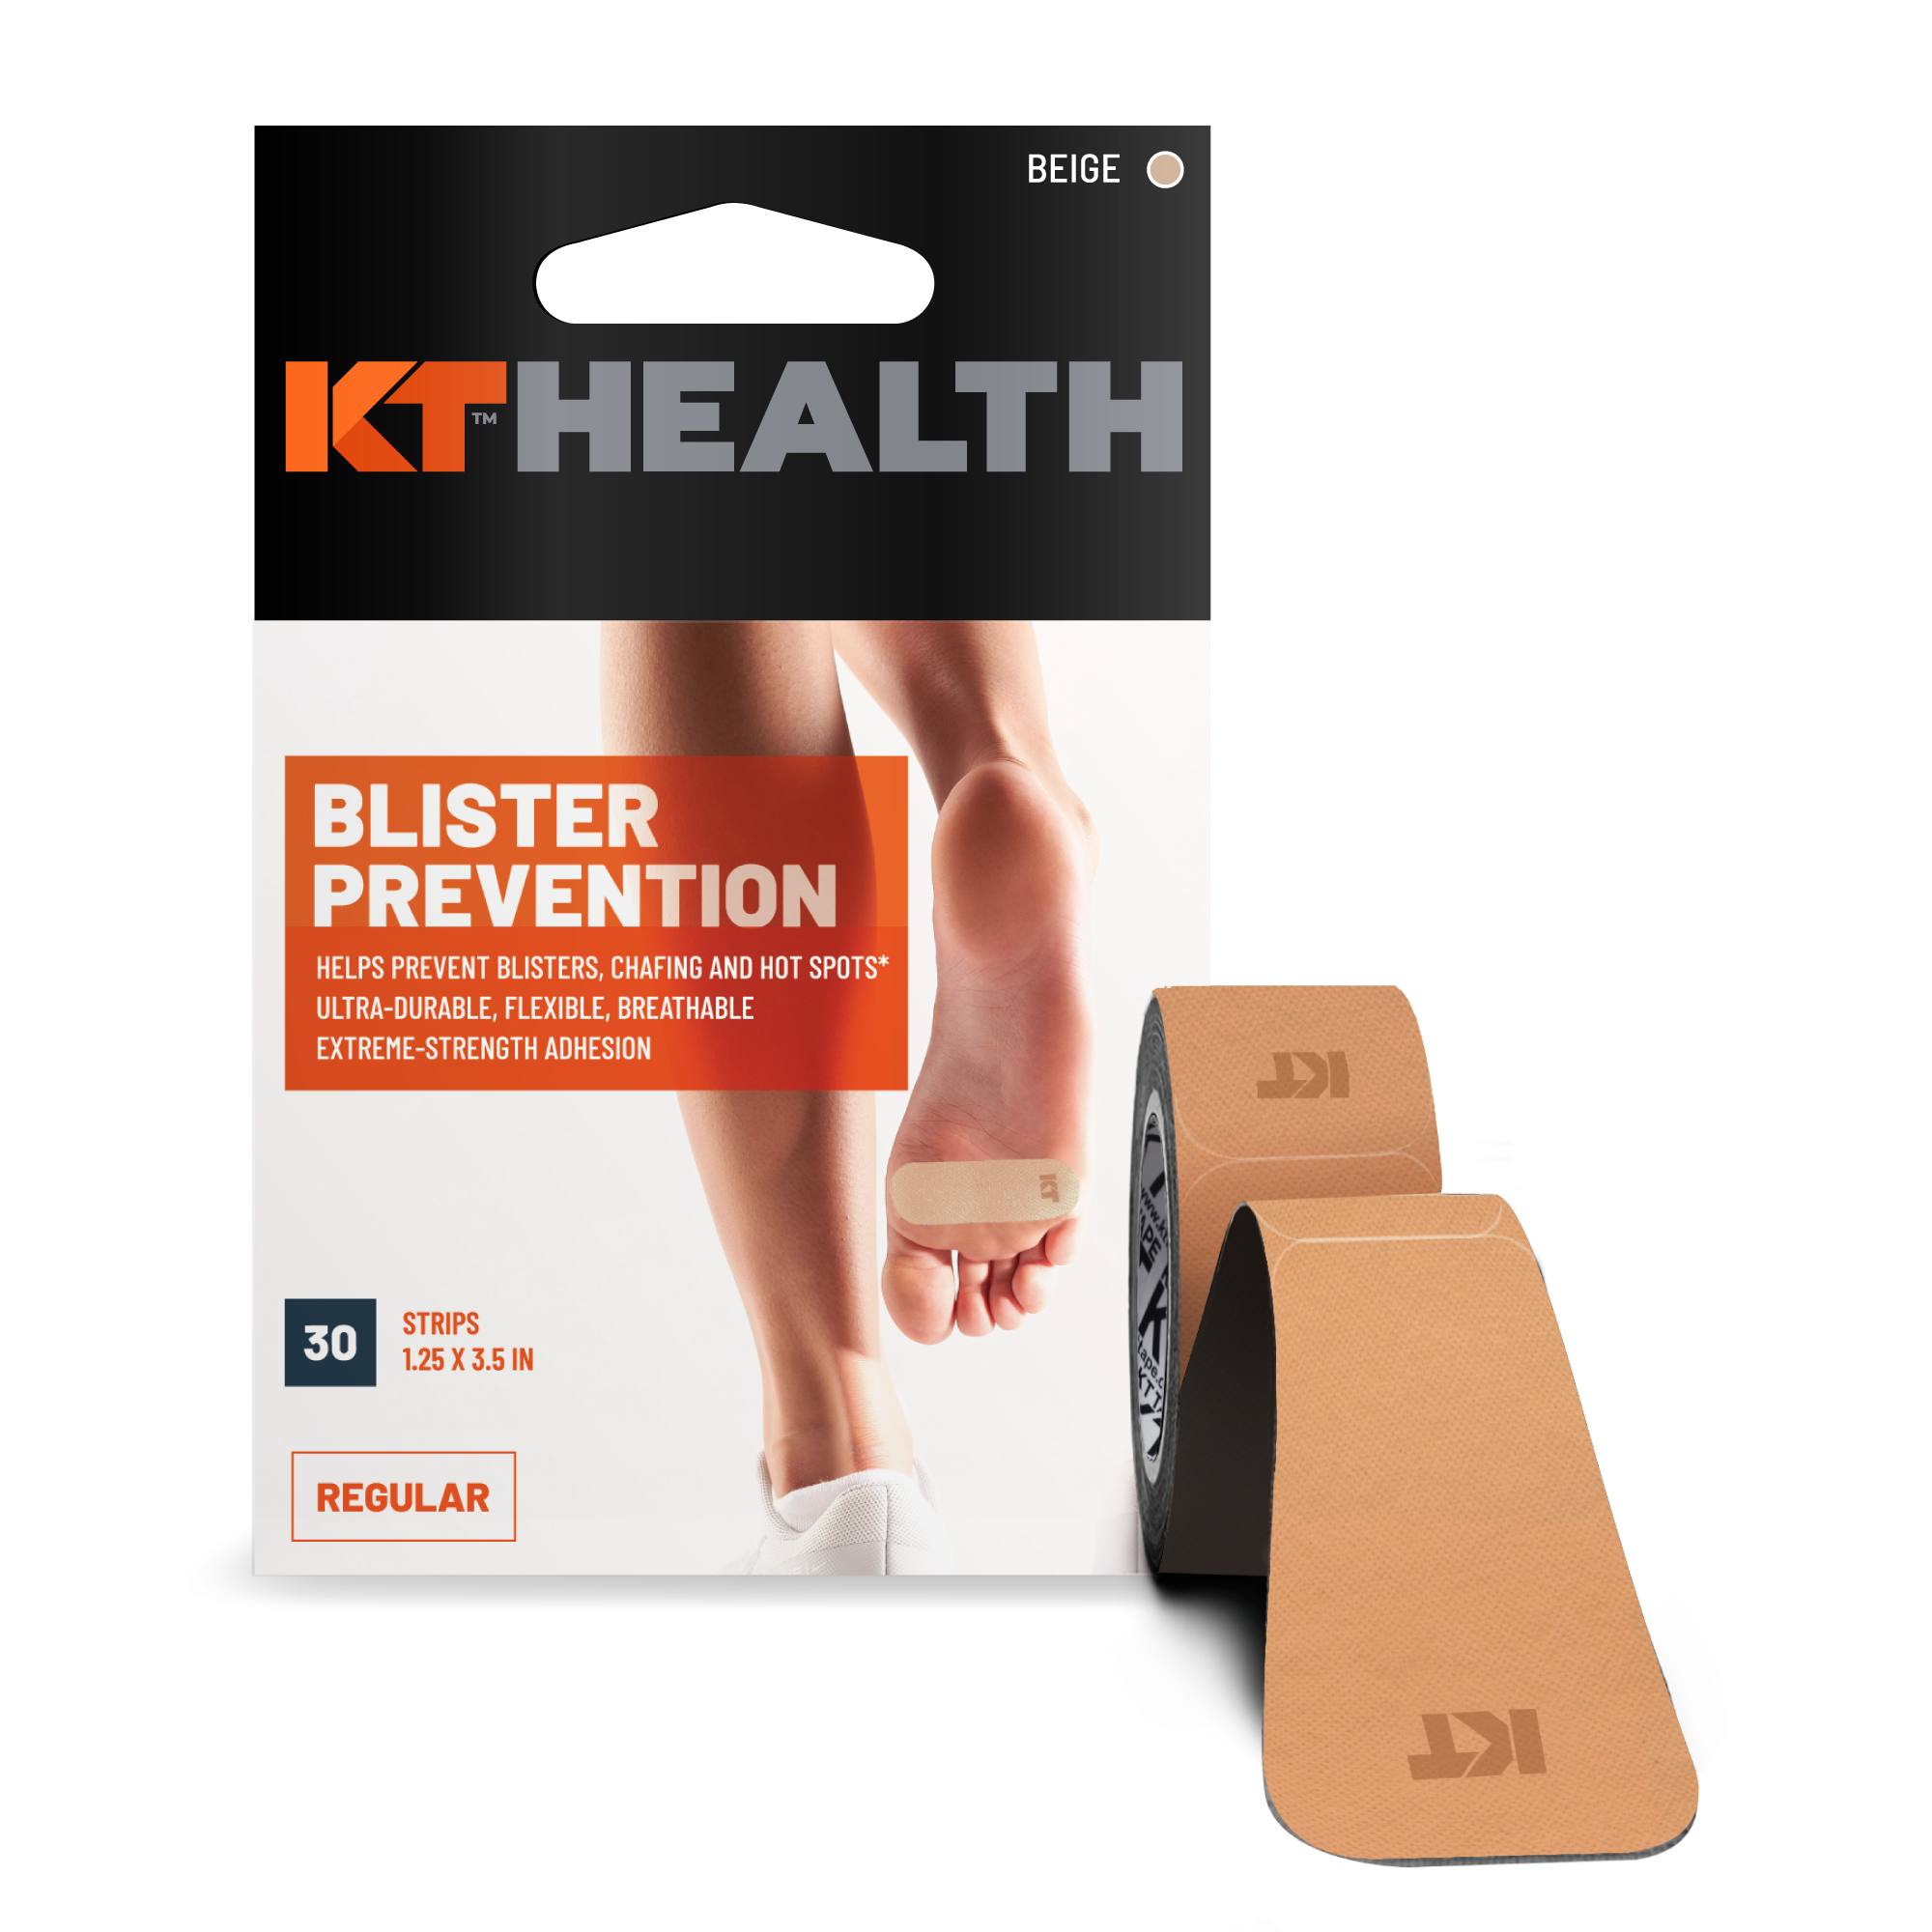 KT RECOVERY+ RECOVERY PATCH® – Products Directory